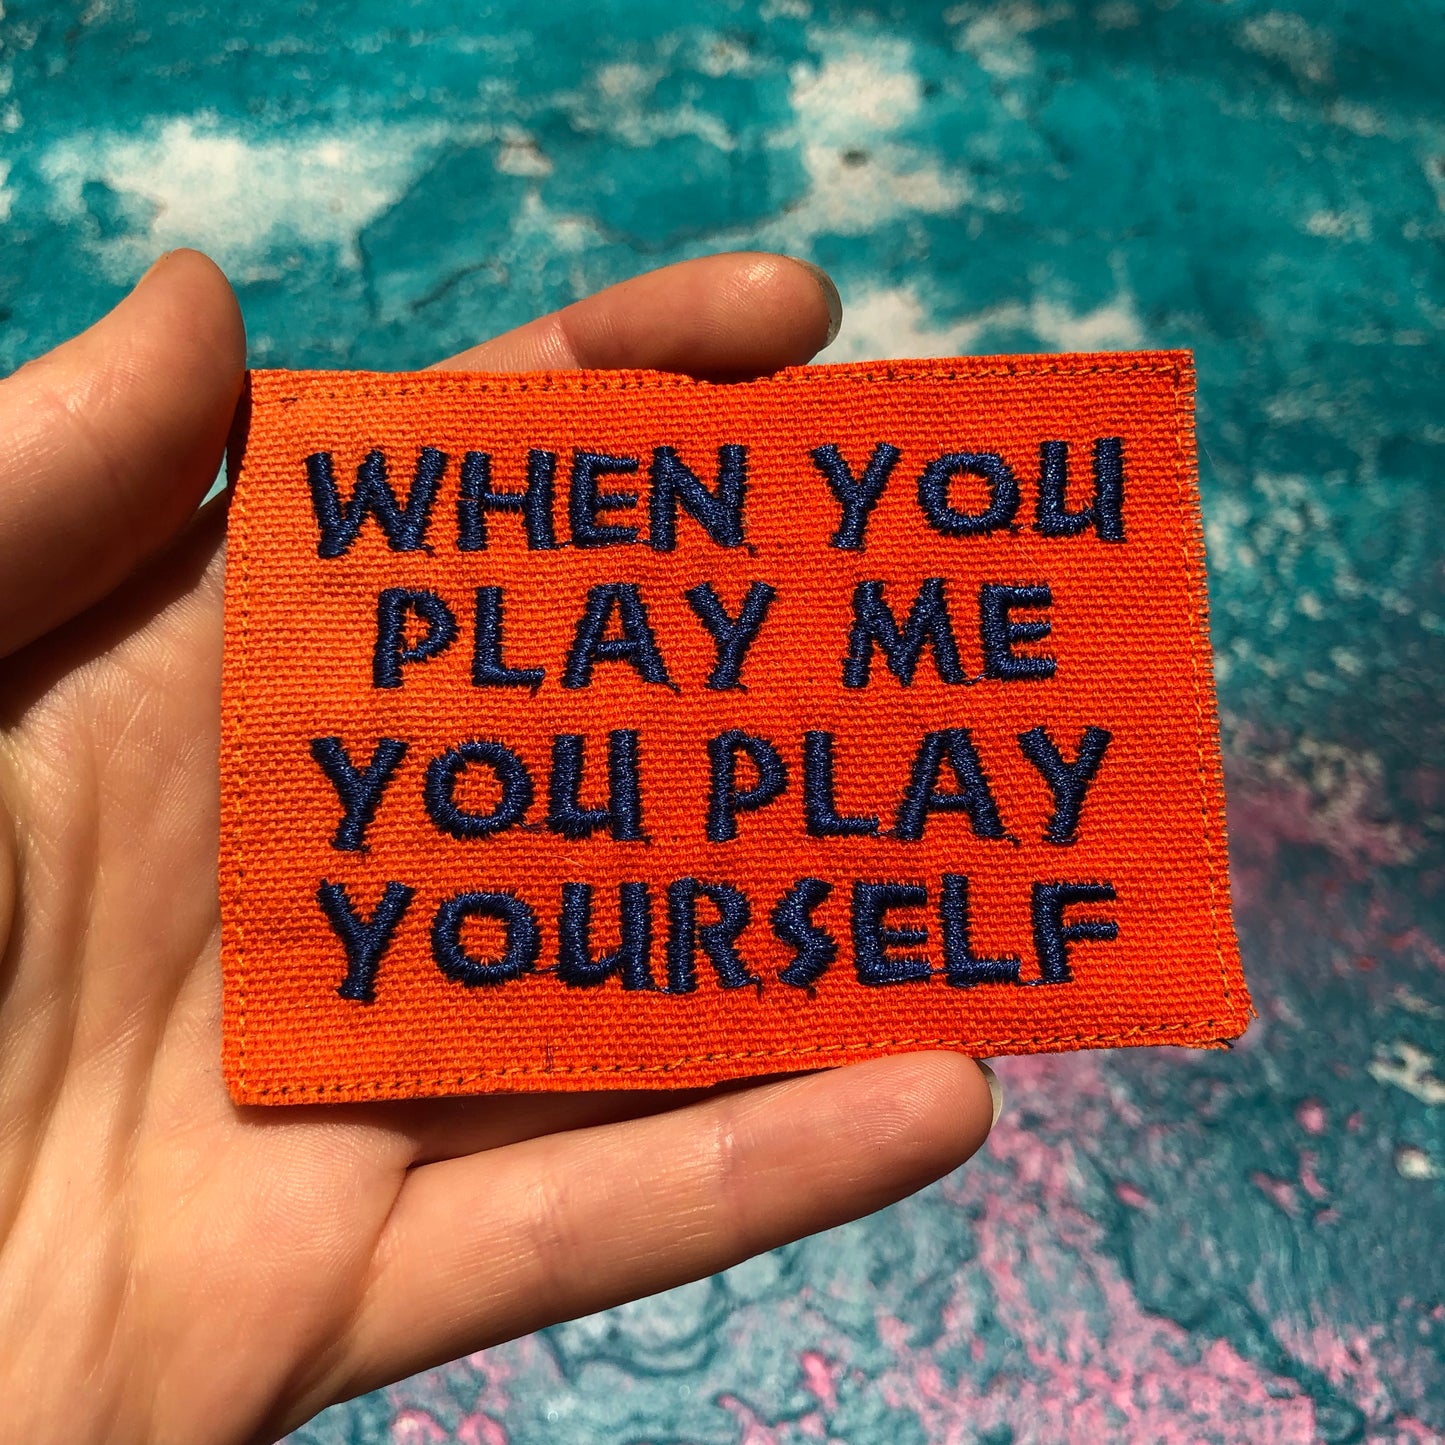 When You Play Me You Play Yourself. Handmade Embroidered Canvas Patch.